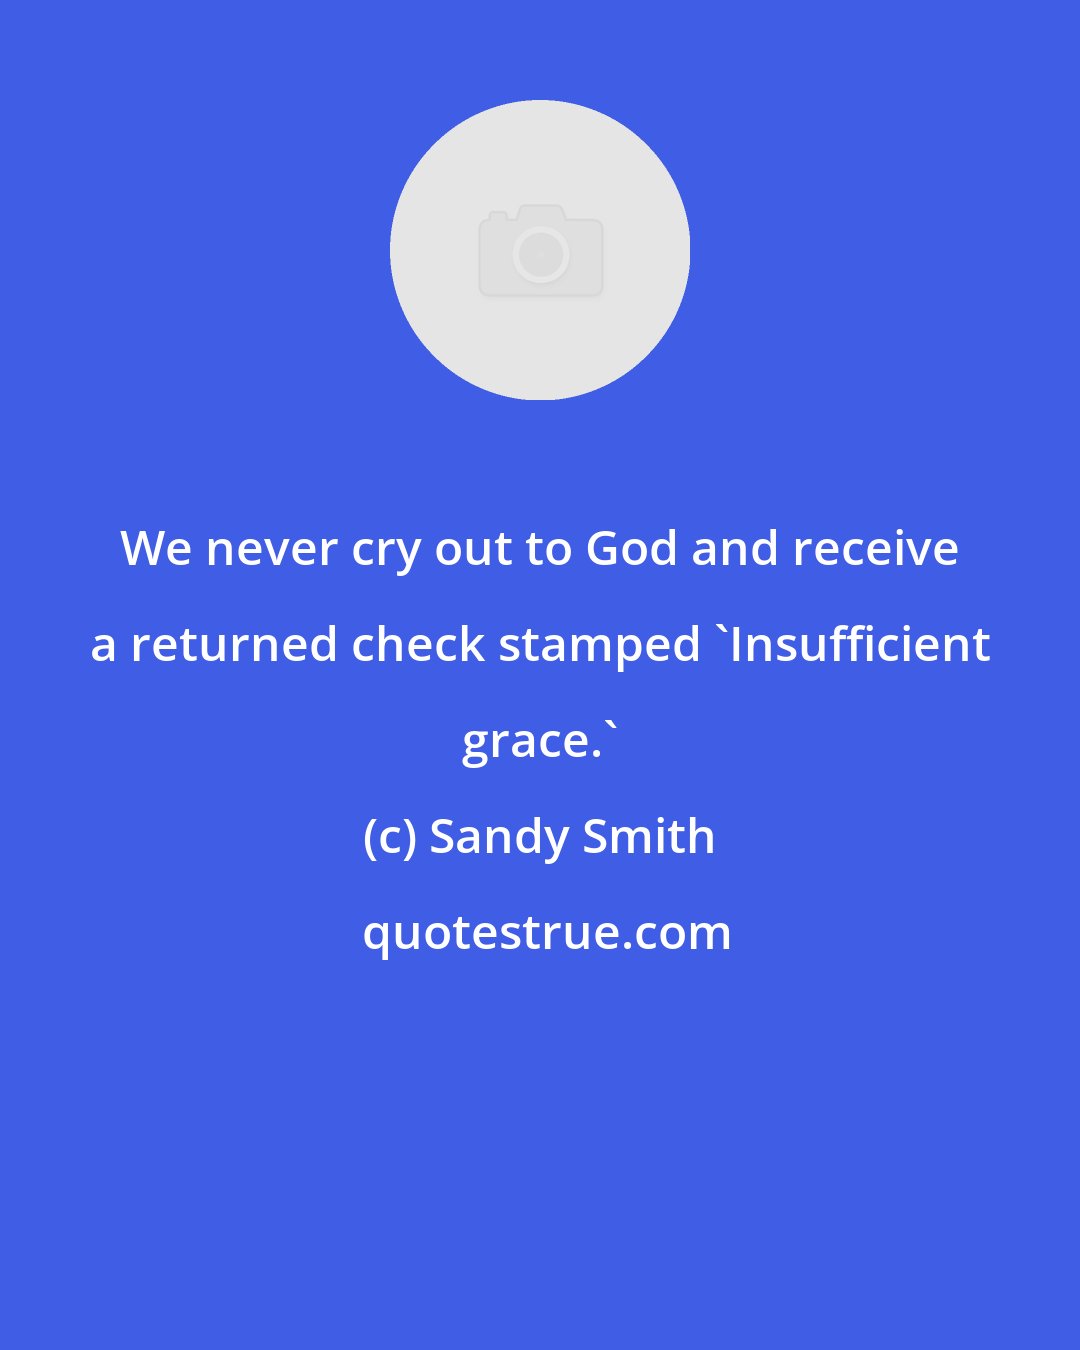 Sandy Smith: We never cry out to God and receive a returned check stamped 'Insufficient grace.'